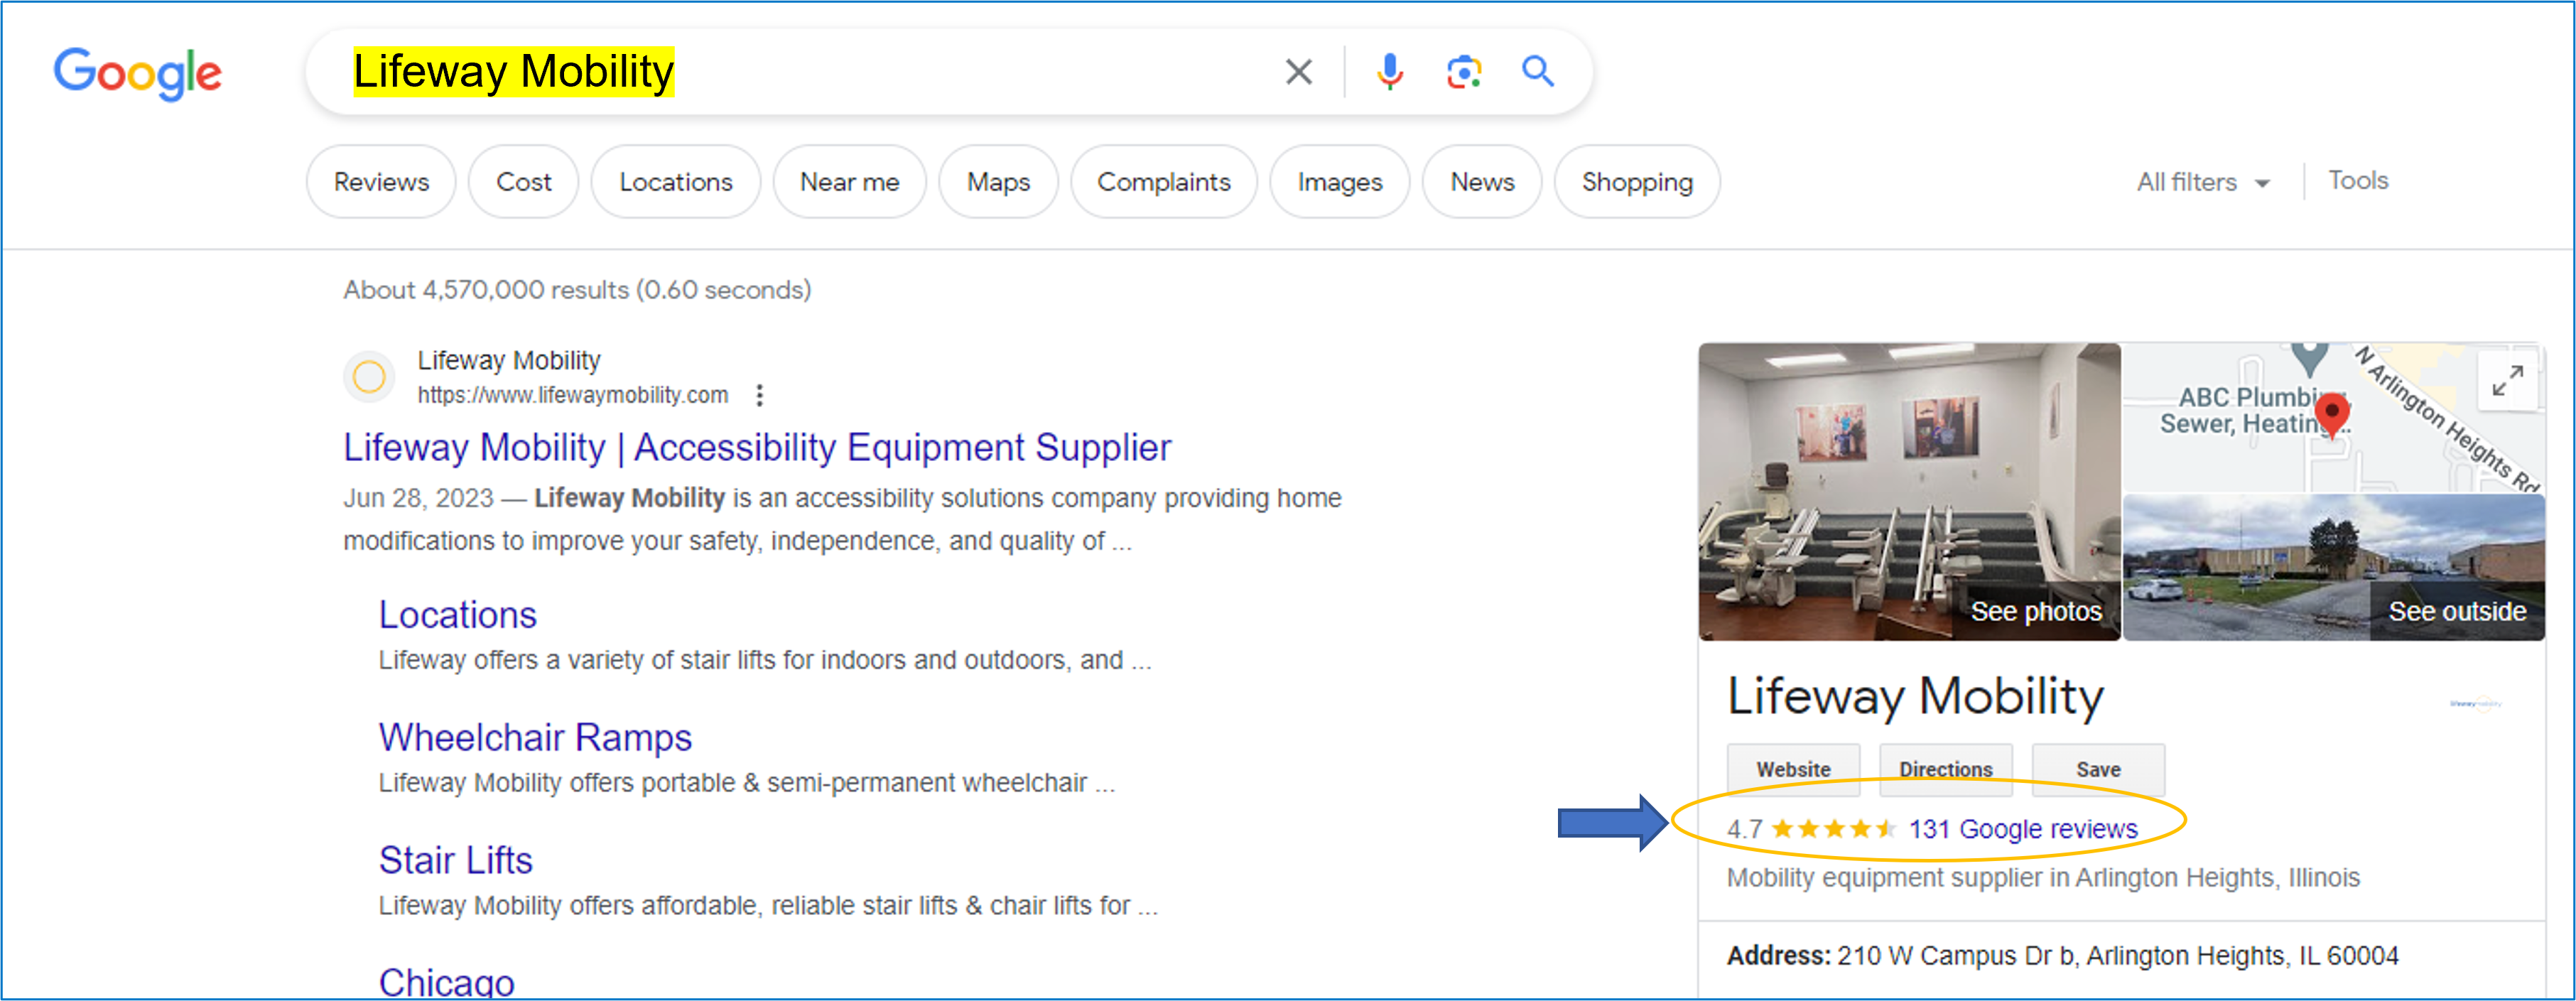 Google search results for Lifeway Mobility, showing reviews